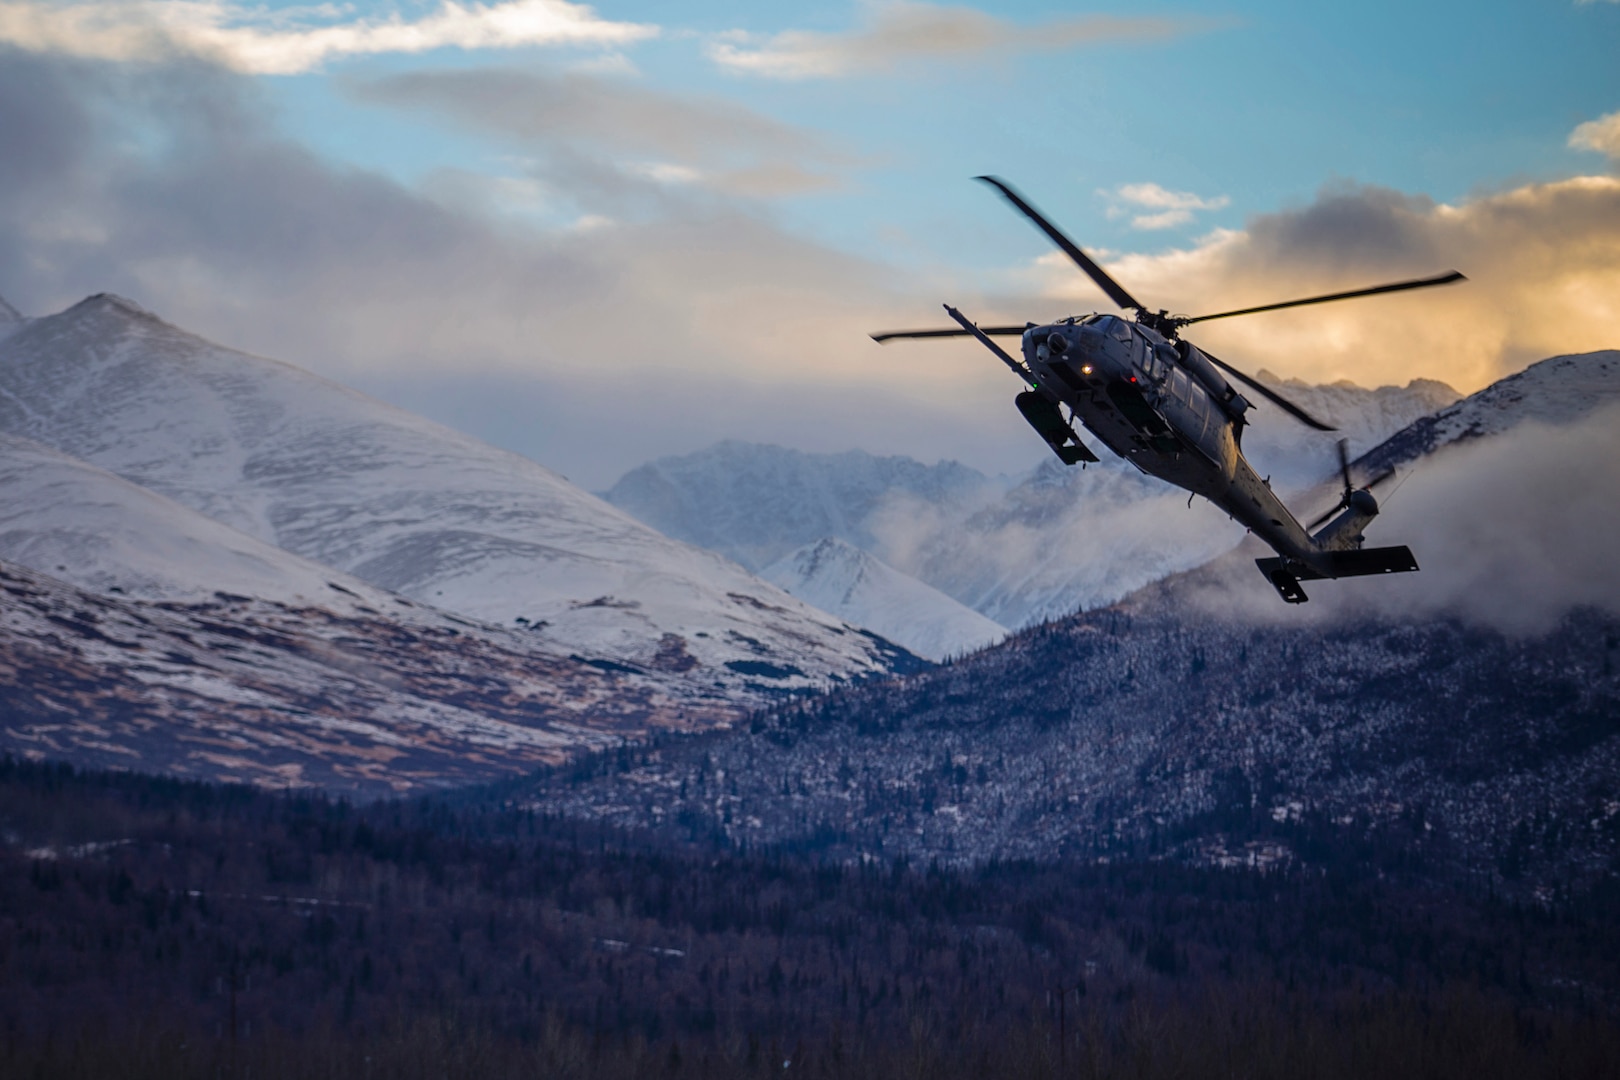 An HH-60 Pave Hawk helicopter from the 210th Rescue Squadron, Alaska Air National Guard, practices “touch and go” maneuvers at Bryant Army Airfield on Joint Base Elmendorf-Richardson, Dec. 17, 2014. A similar craft rescued a snowmobiler.